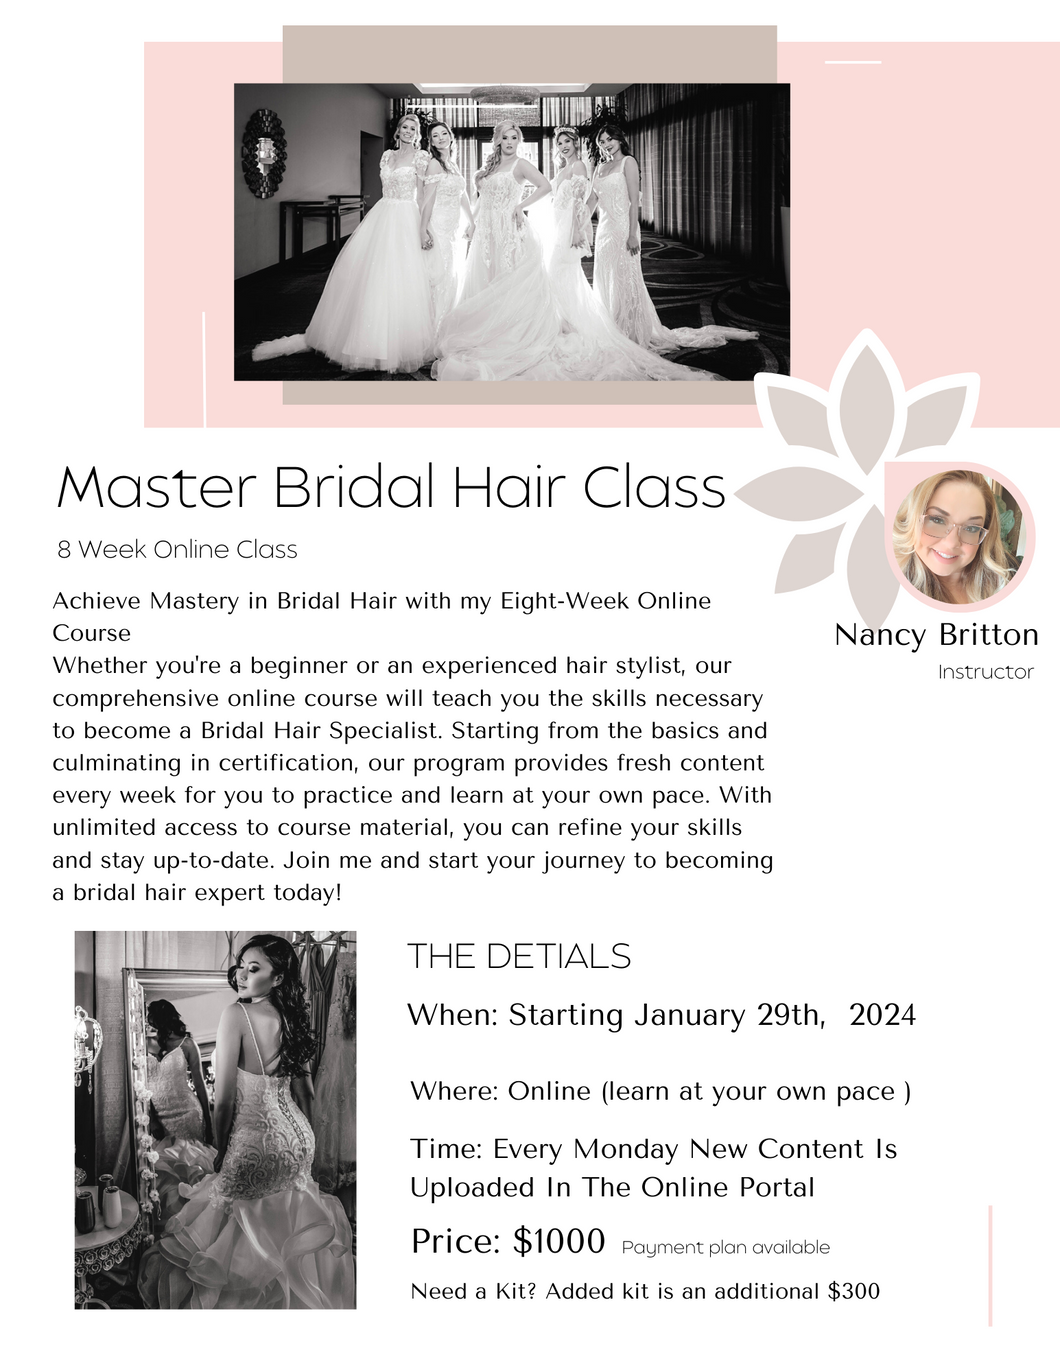 Online Master Bridal Hair Class January 29th 2024